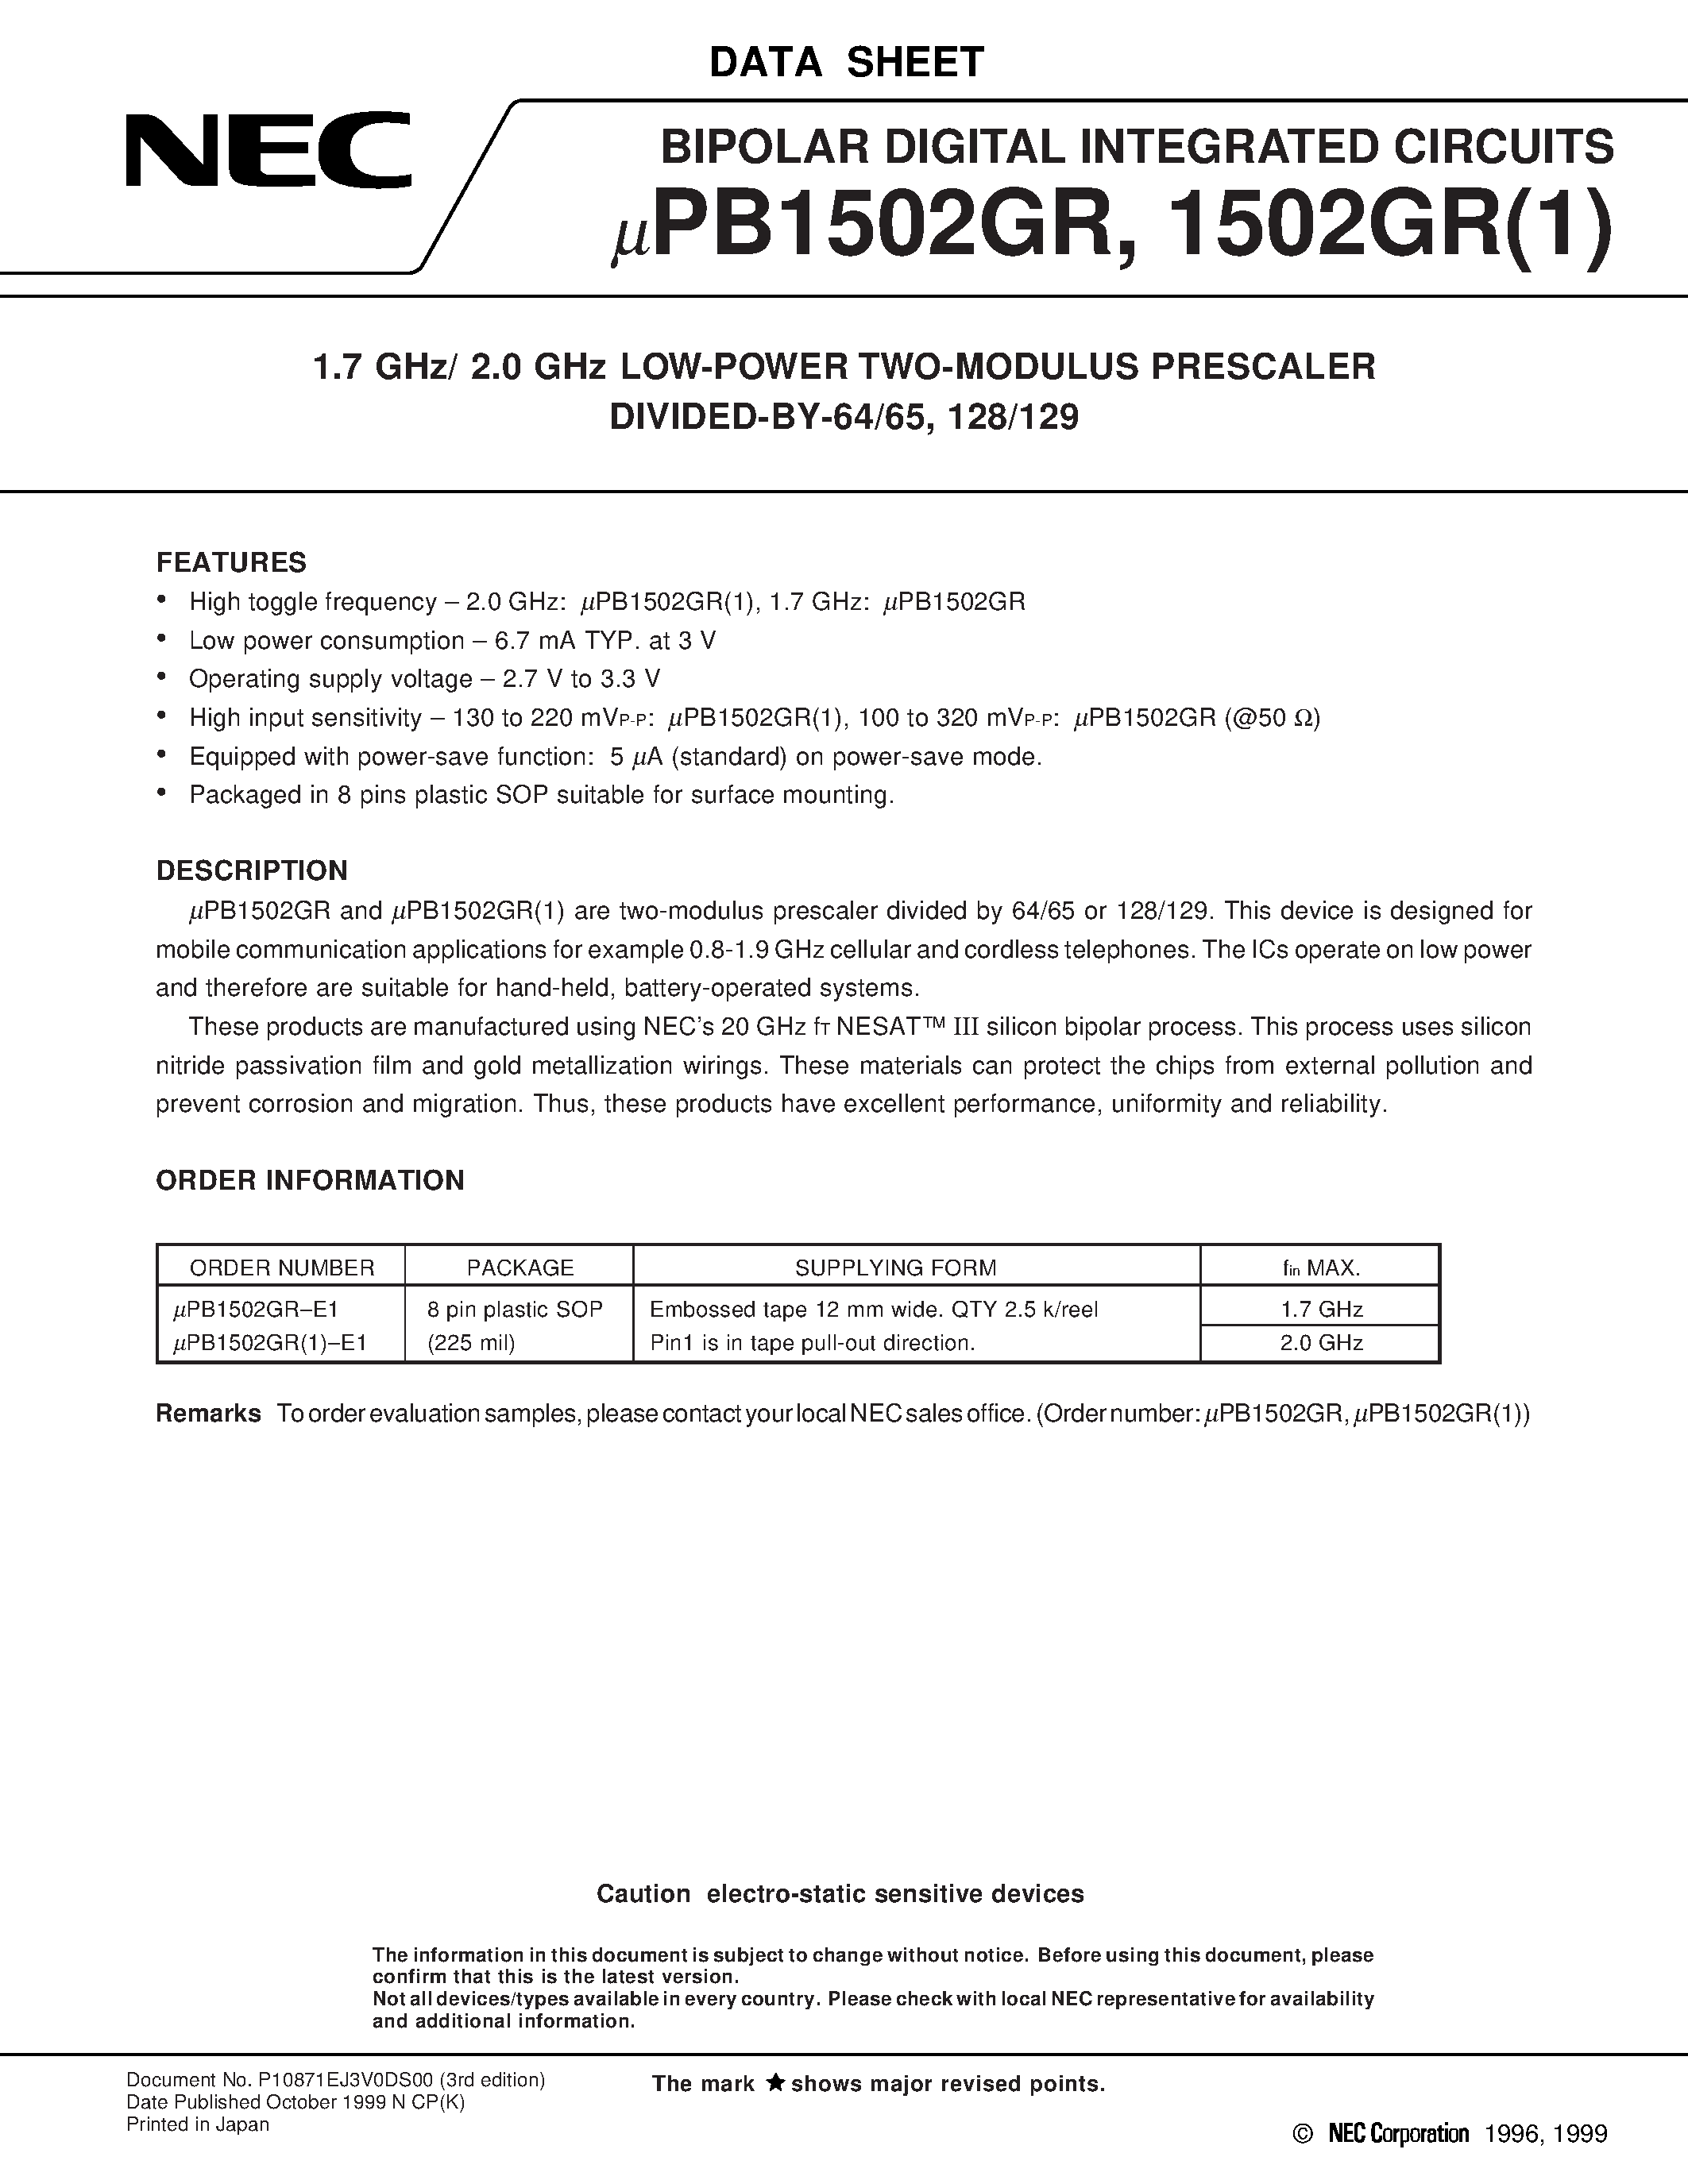 Datasheet UPB1502GR - 1.7 GHz/ 2.0 GHz LOW-POWER TWO-MODULUS PRESCALER DIVIDED-BY-64/65/ 128/129 page 1